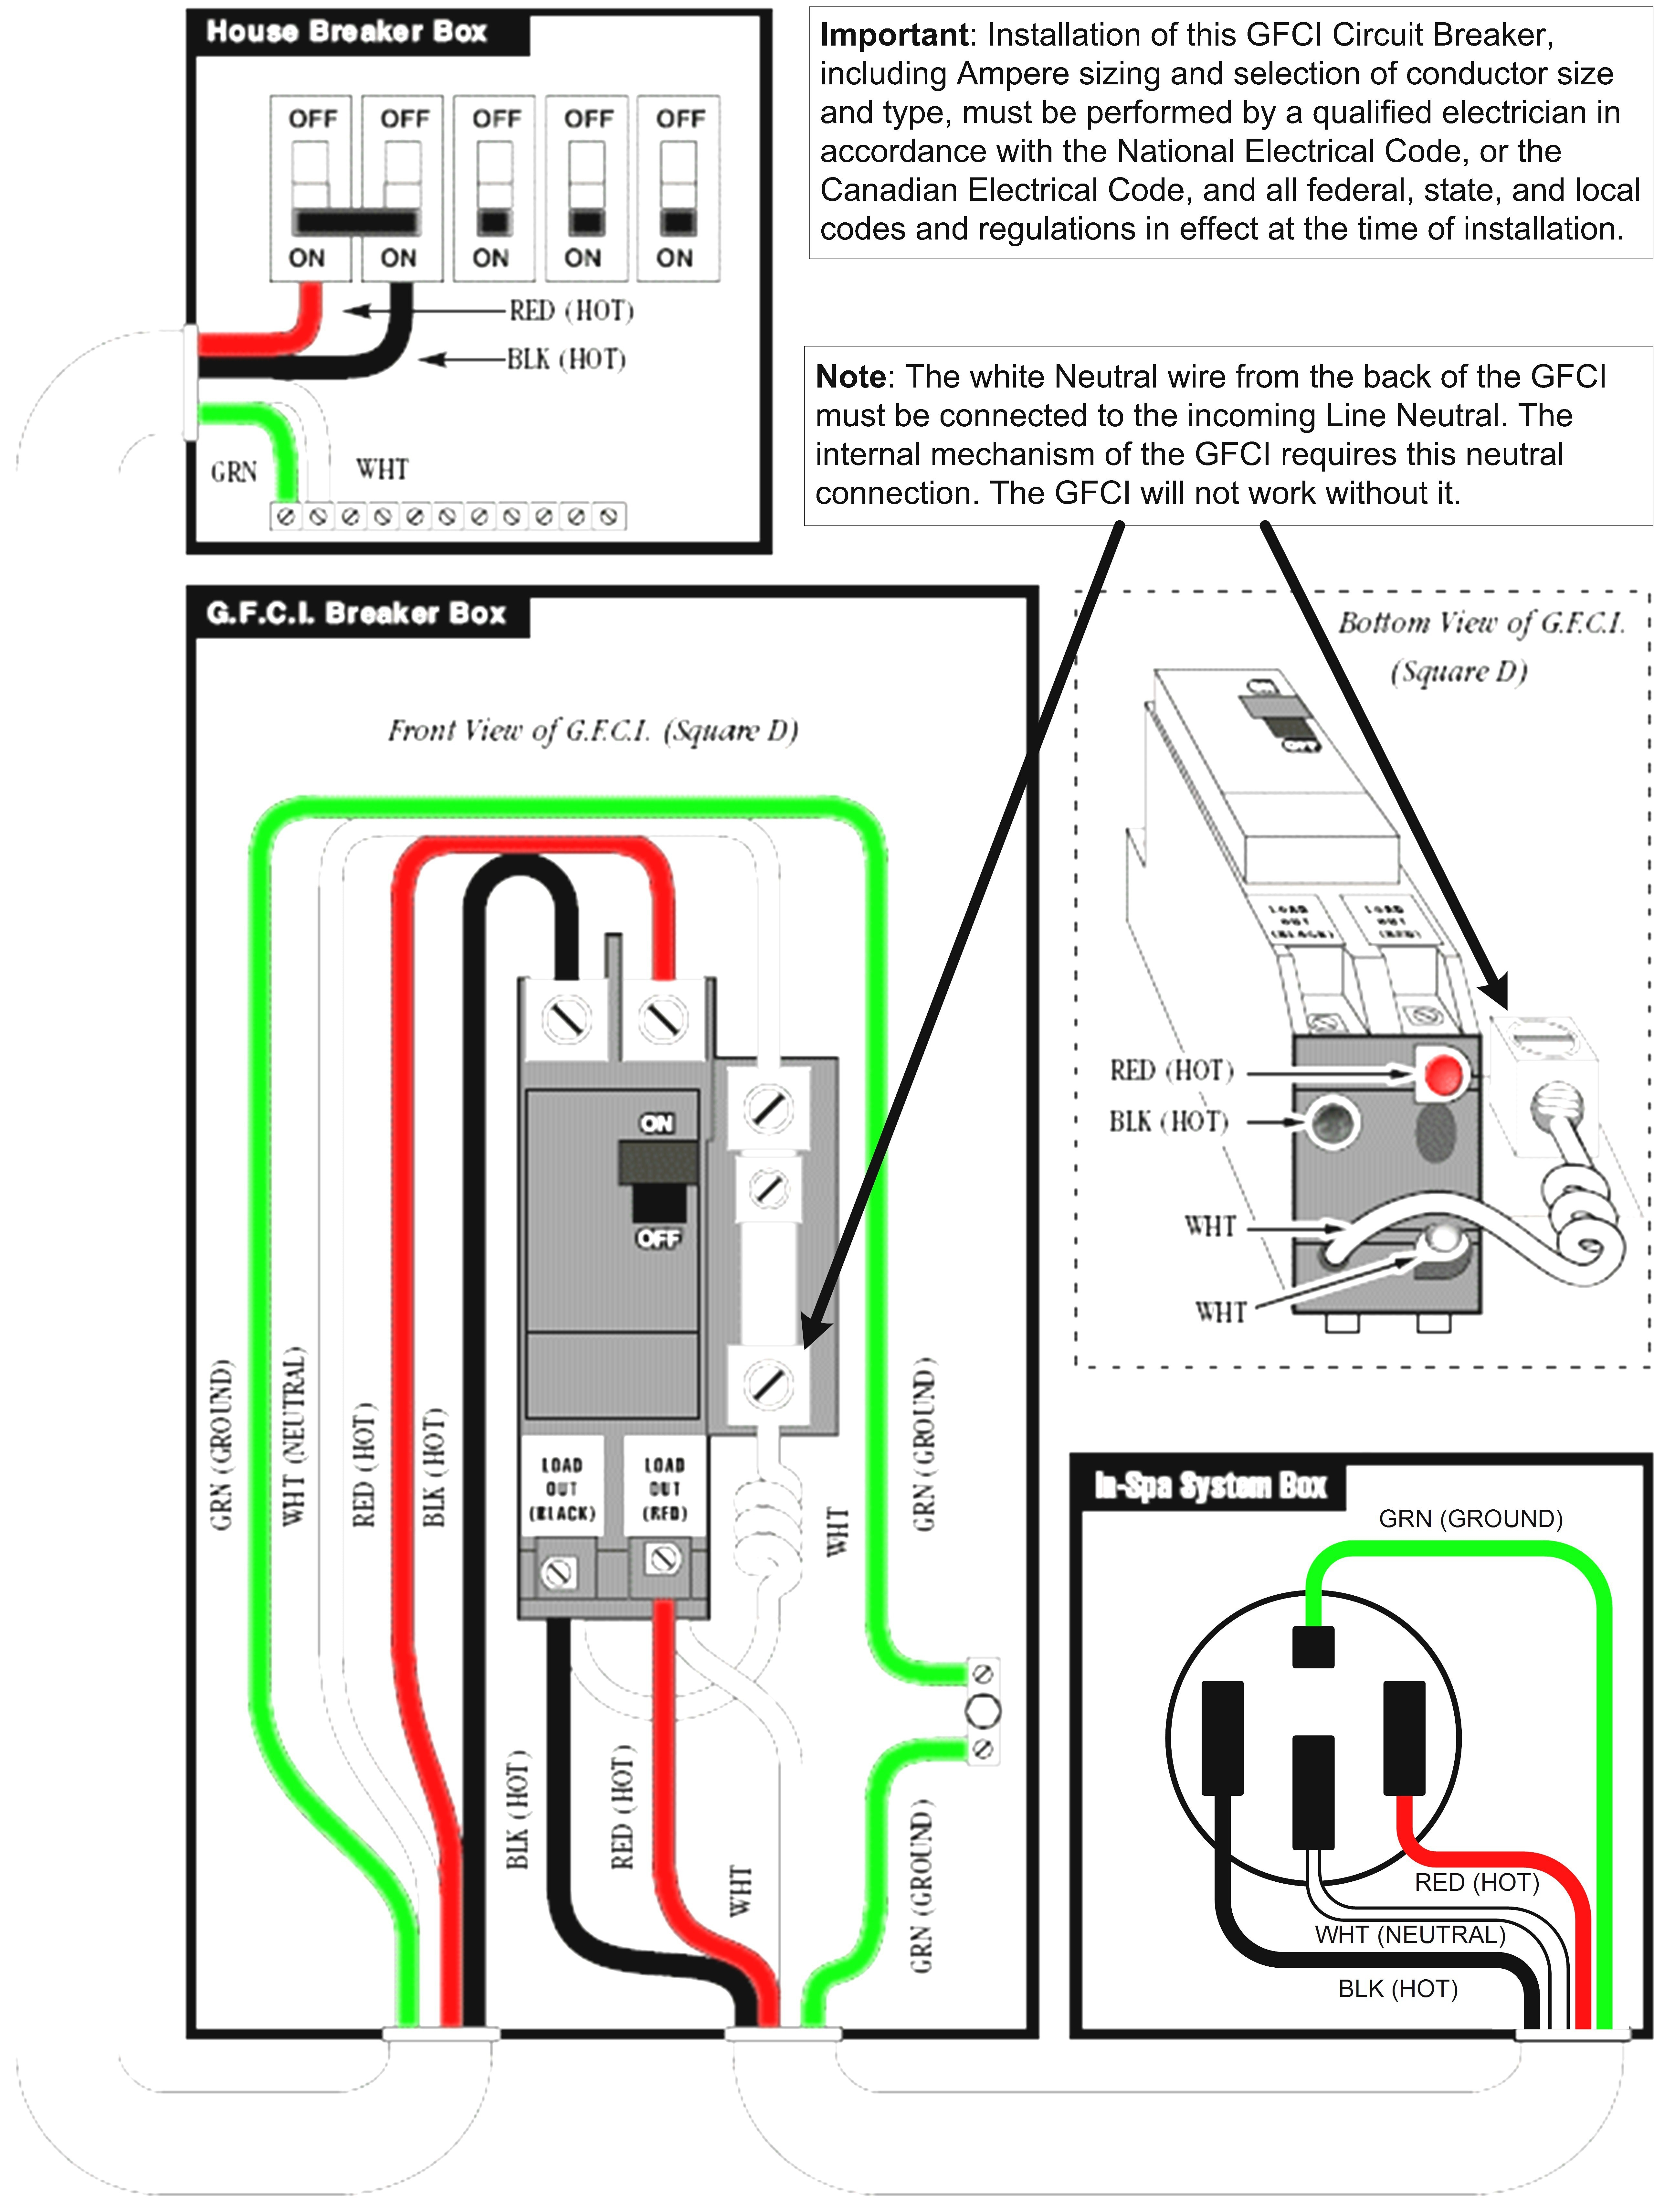 Wiring Multiple Outlets Diagram - Allove - Multiple Outlet Wiring Diagram